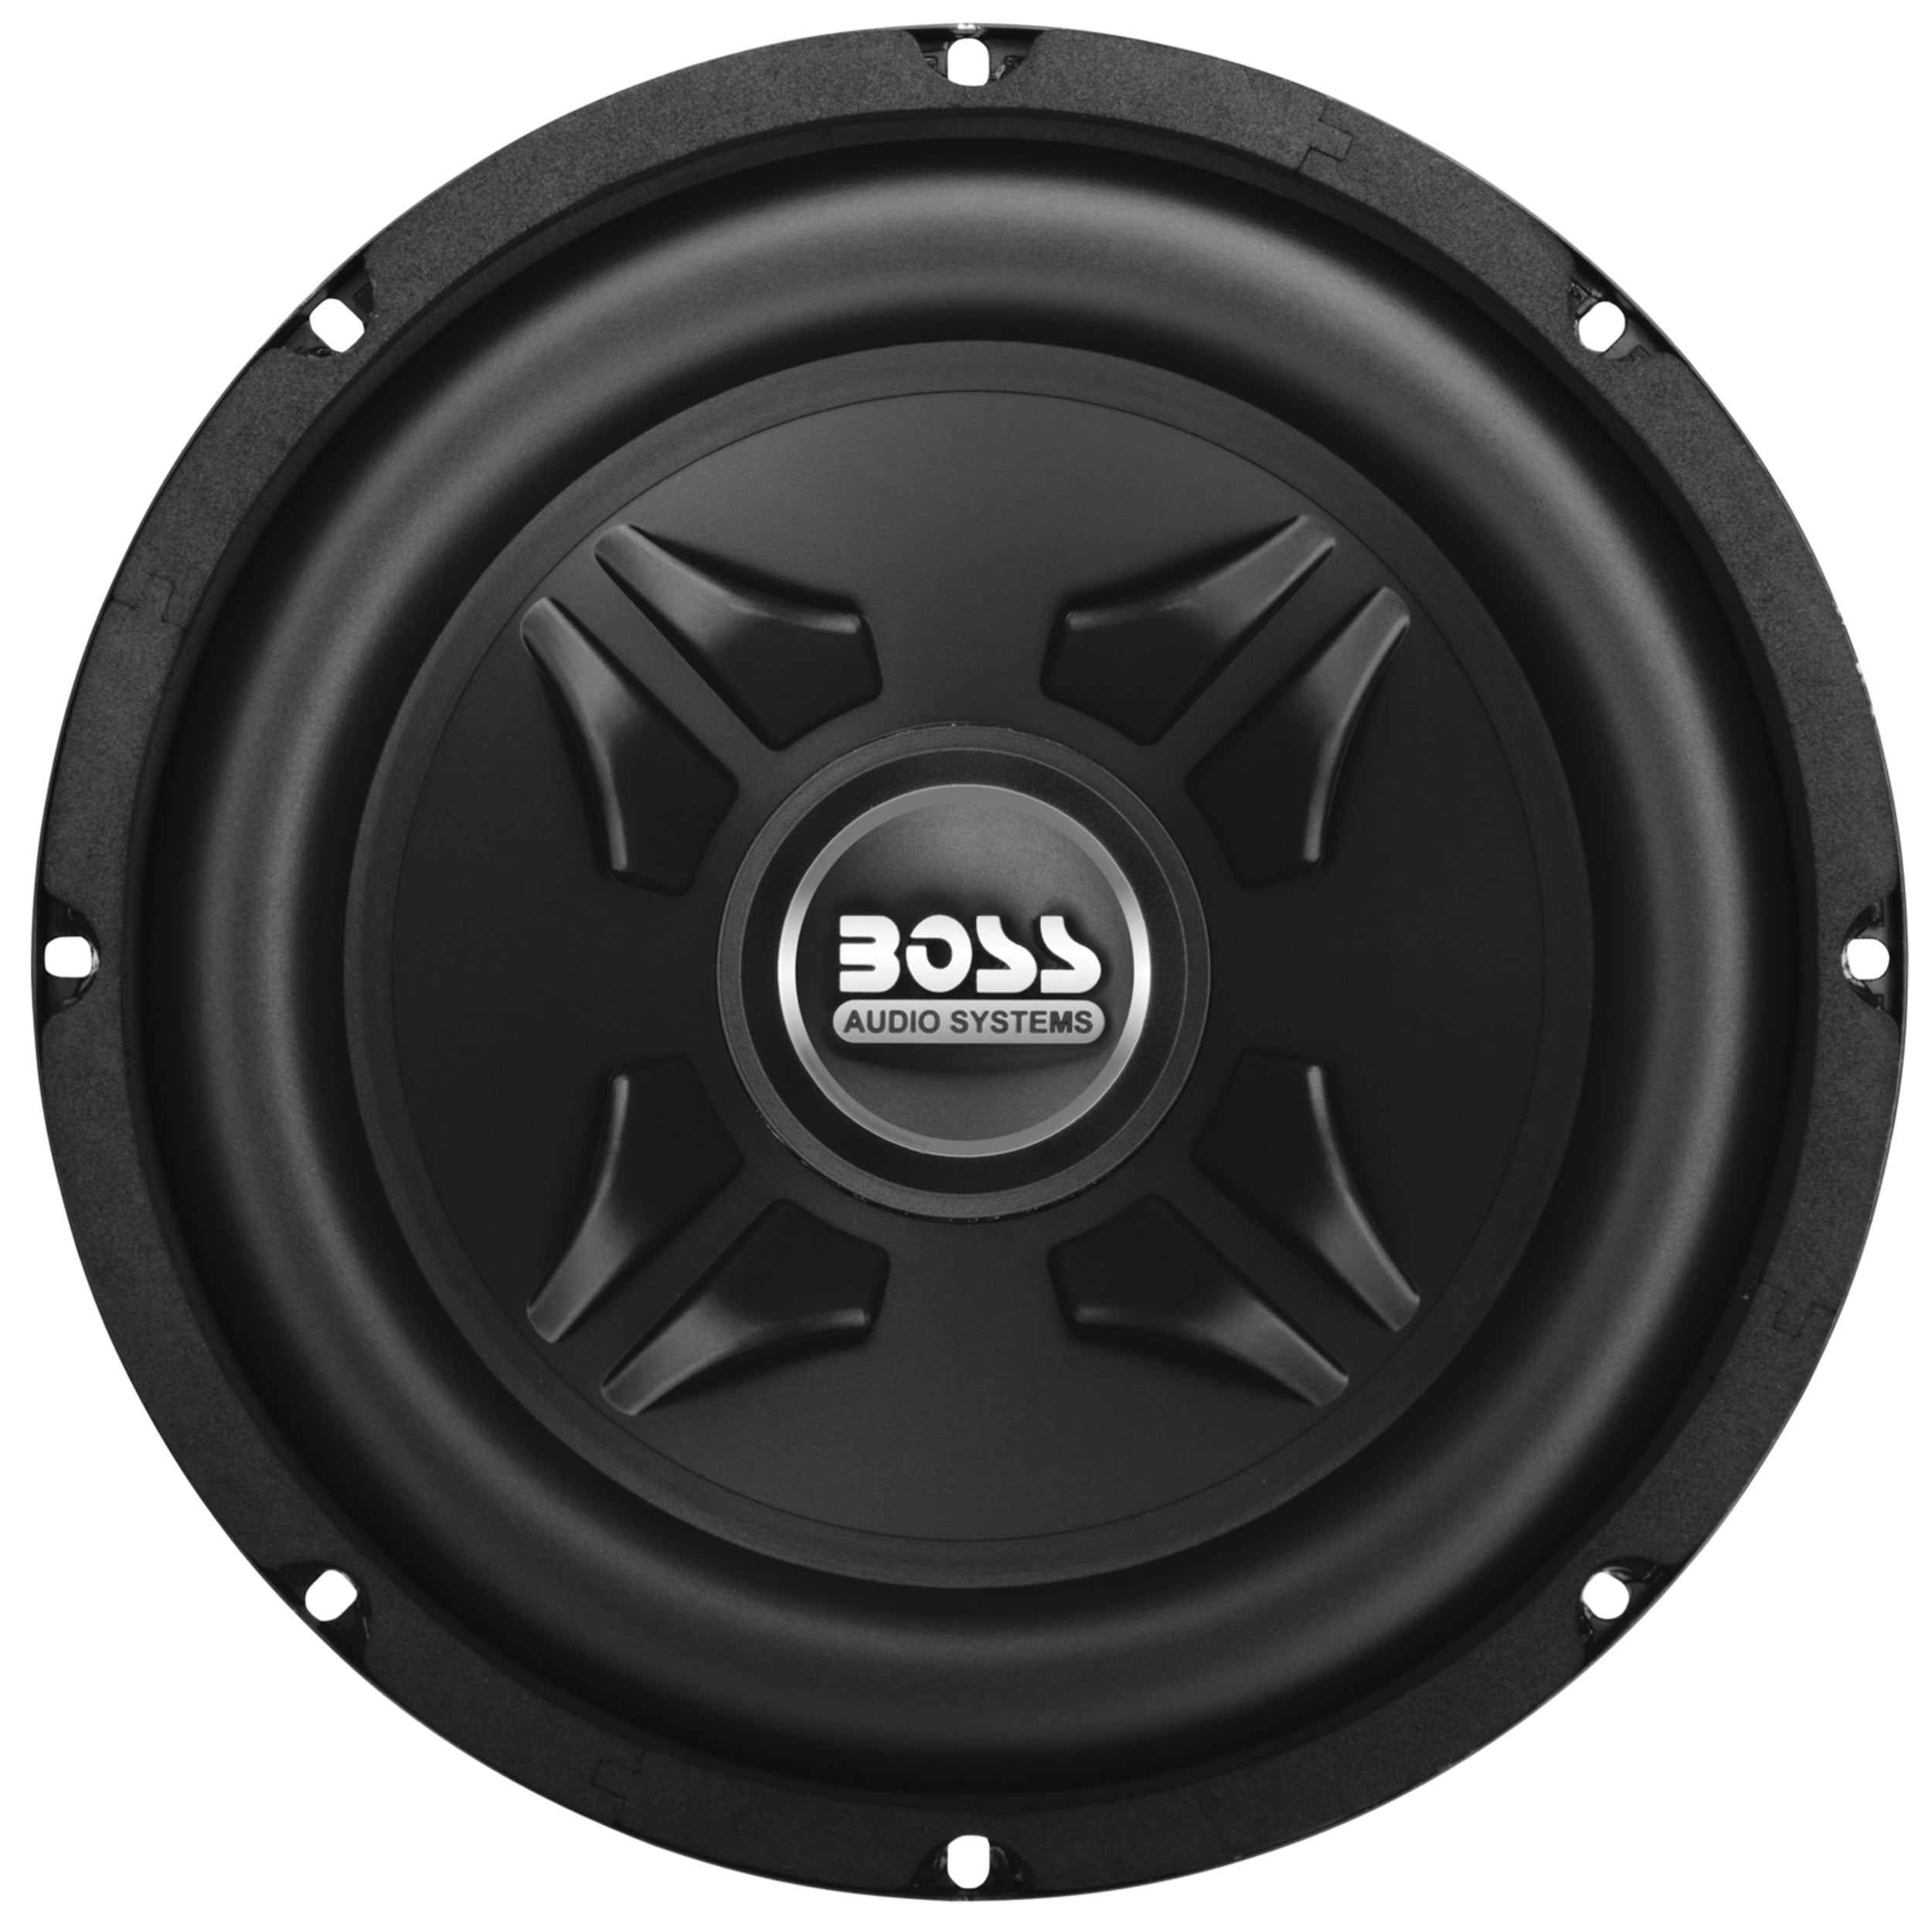 BOSS Audio Systems CXX10 Chaos Exxtreme Series 10 inch Car Subwoofer - 800 Watts Max, Single 4 Ohm Voice Coil, for Truck, Boxes and Enclosures, Use With Amplifier - Walmart.com